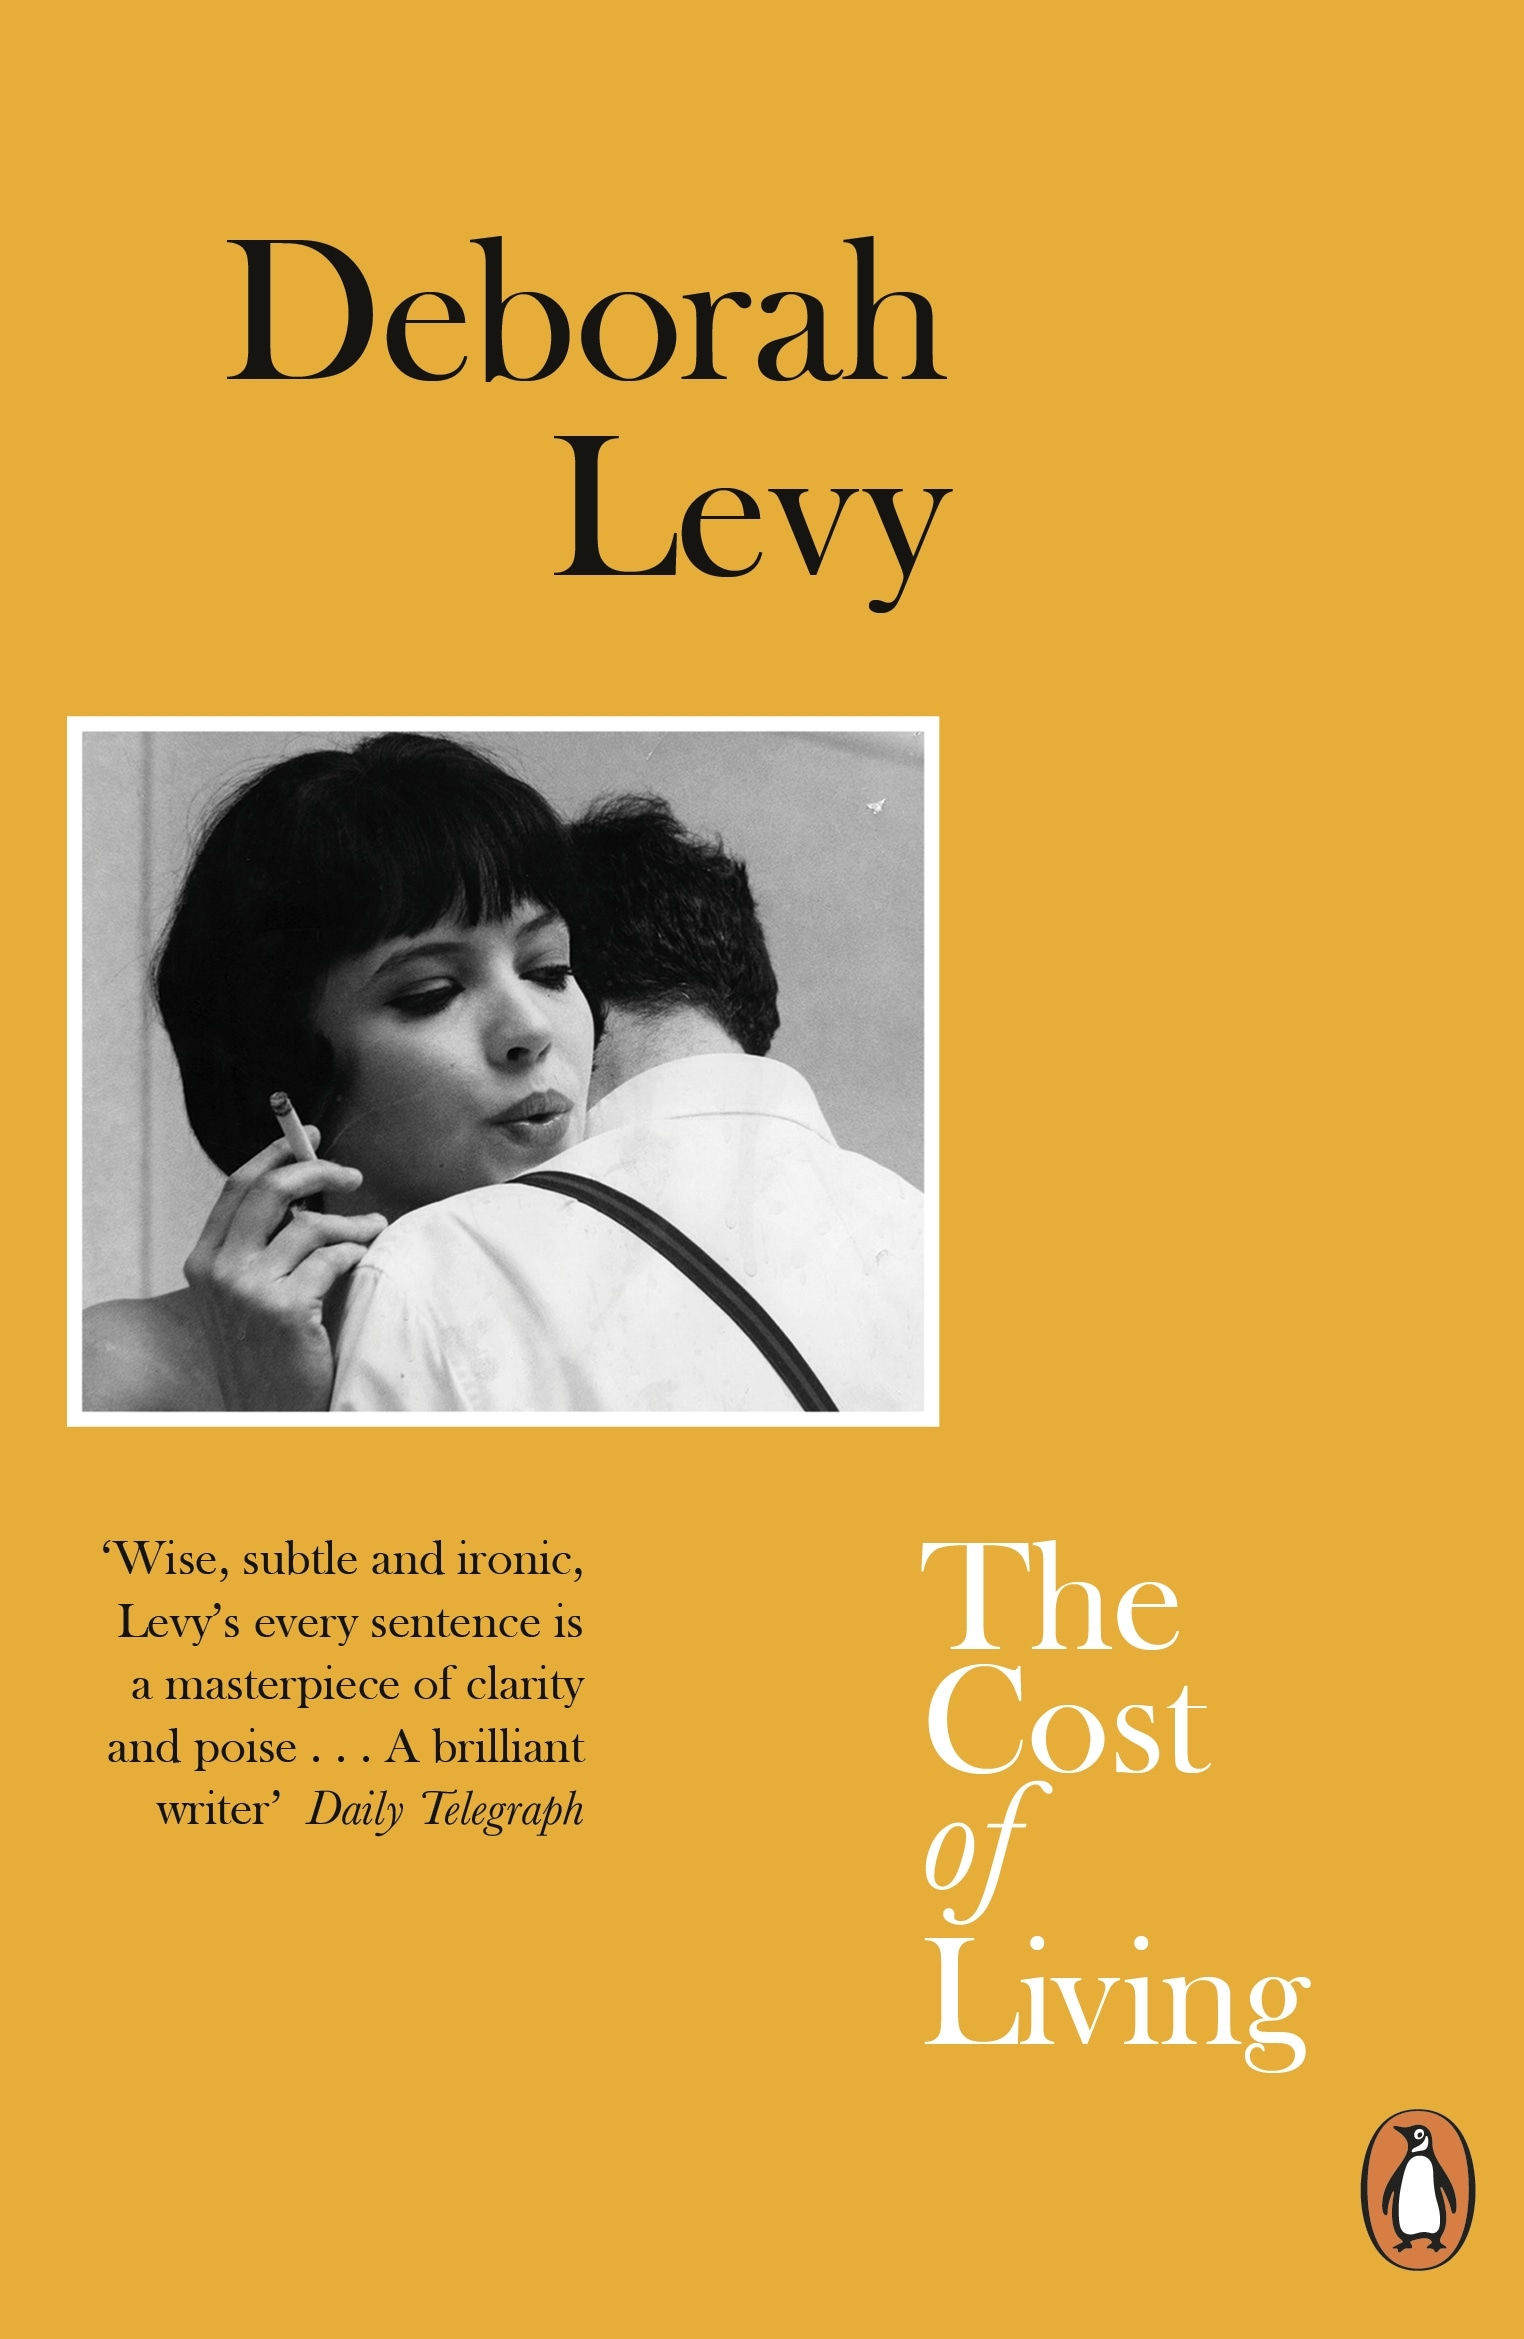 Book “The Cost of Living” by Deborah Levy — February 7, 2019